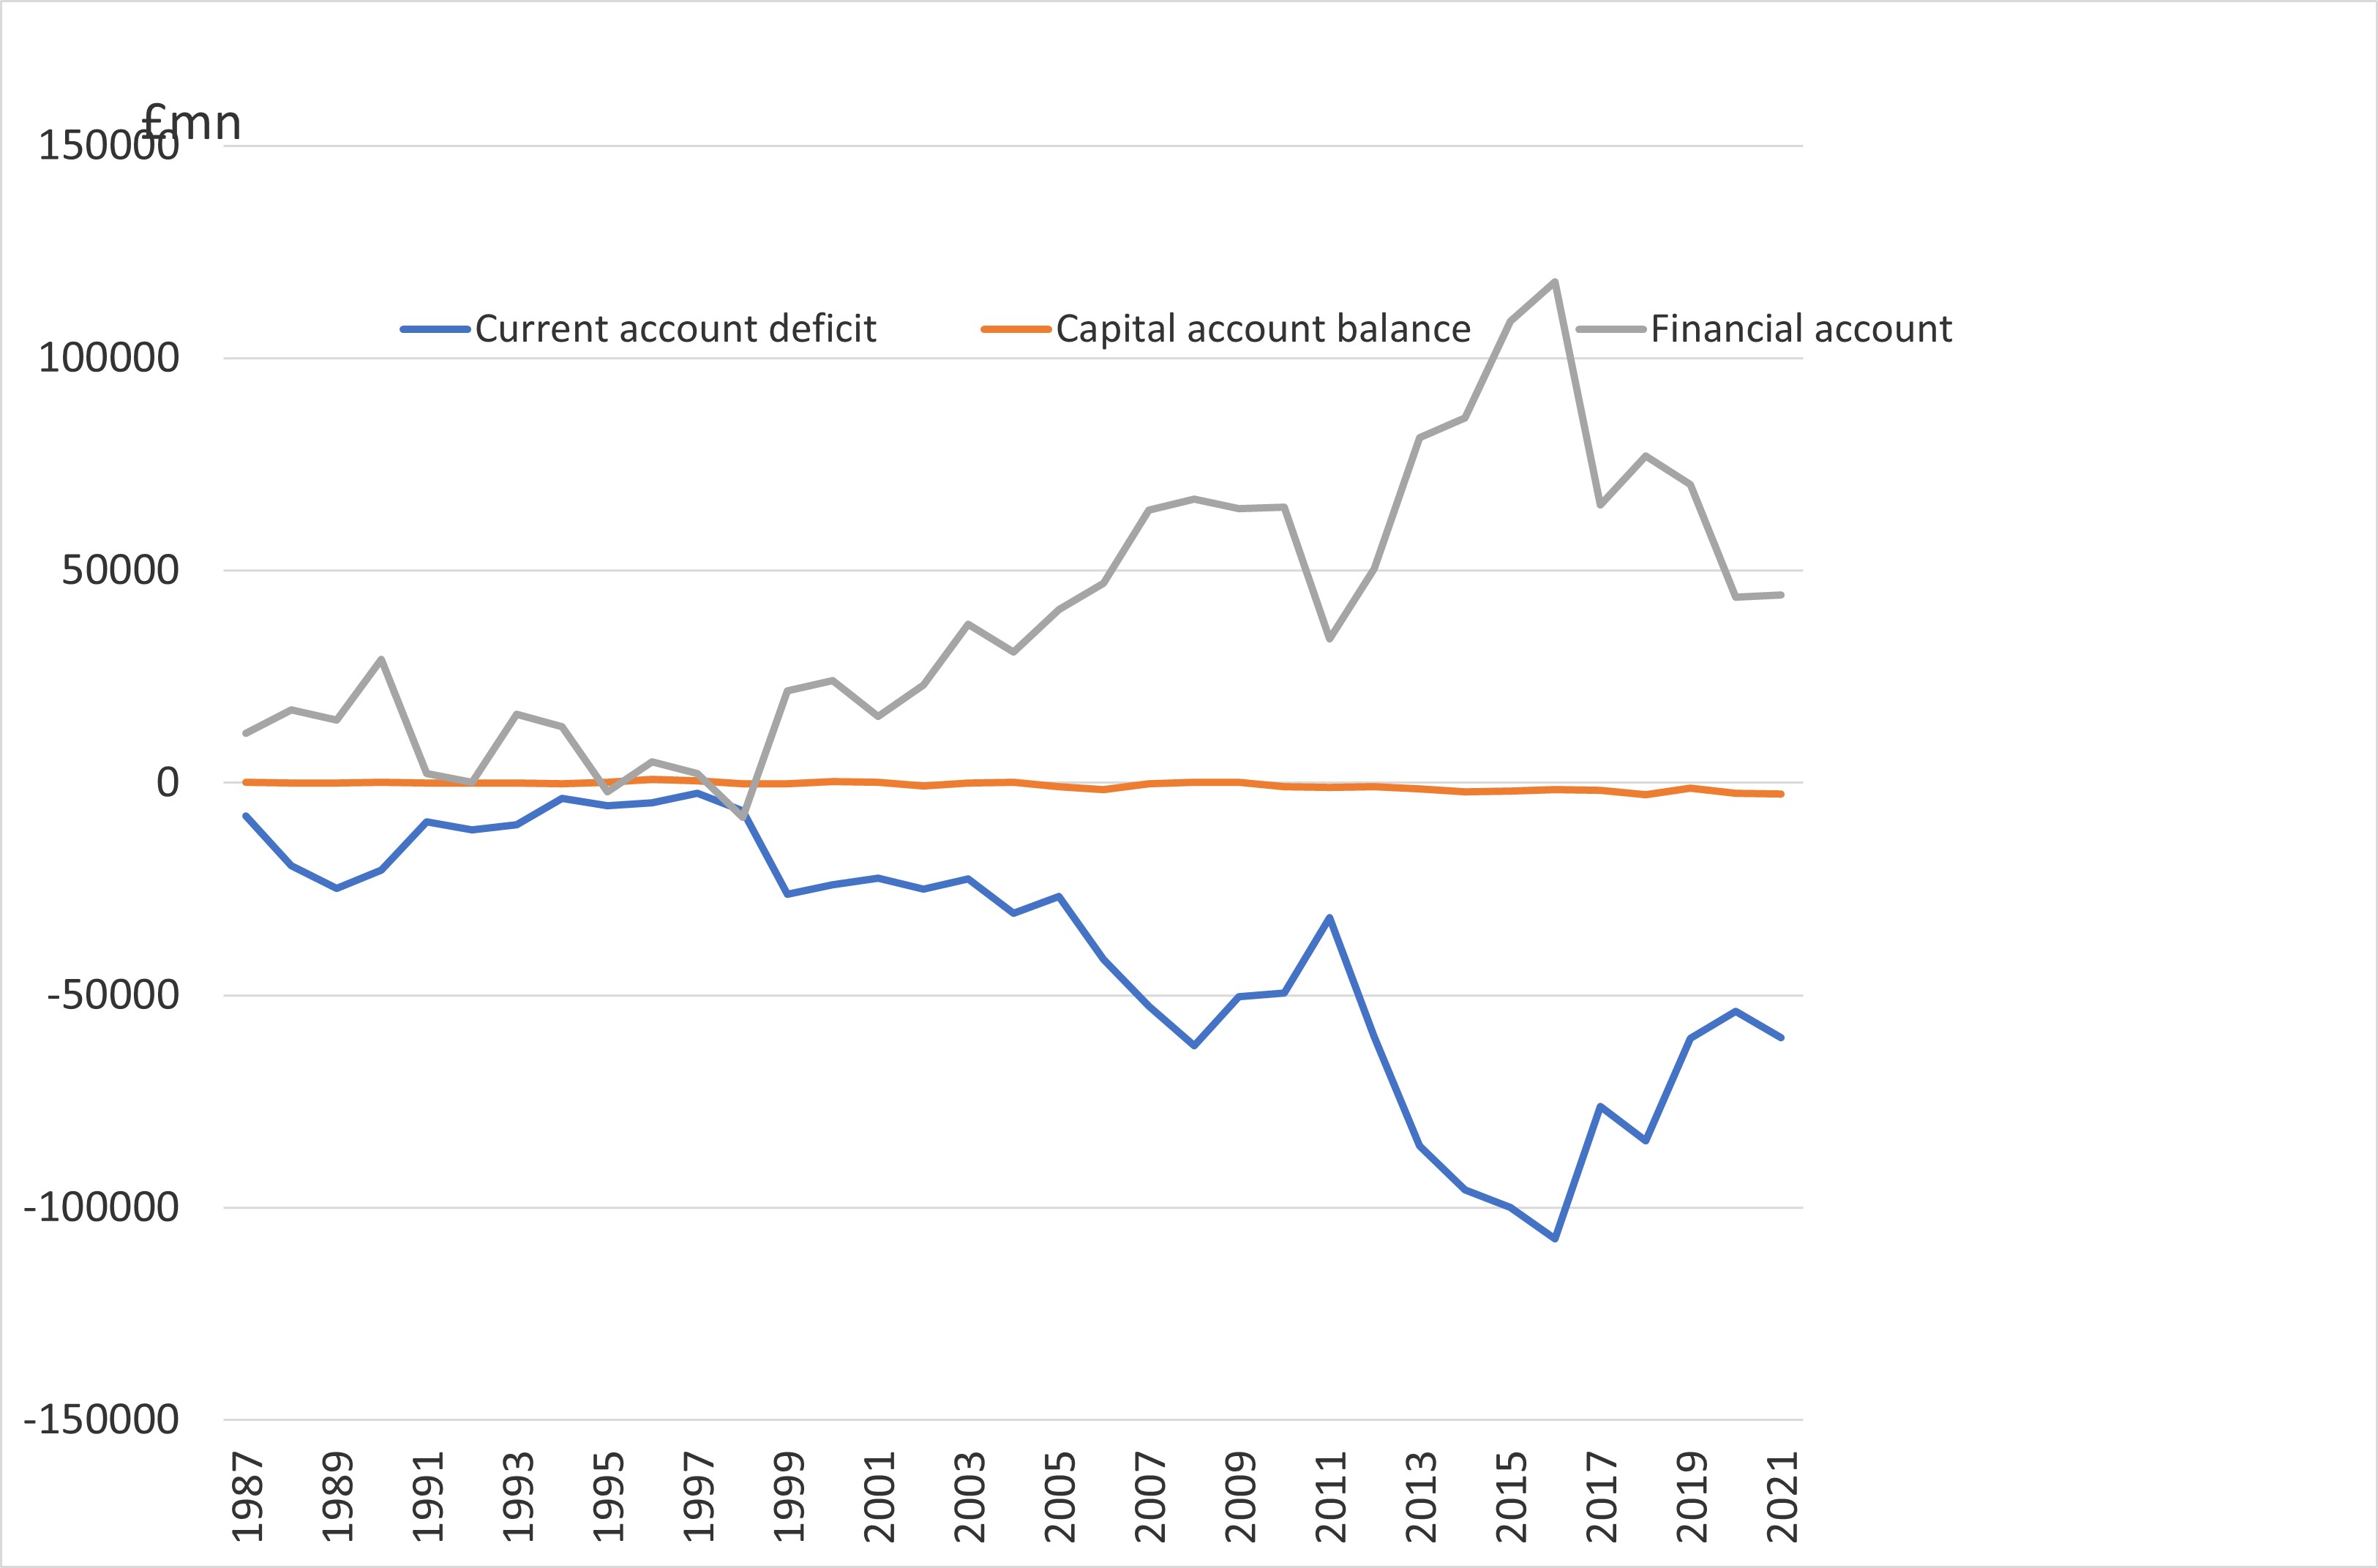 Chart 1 UK current account has been in persistent deficit since the 1980s